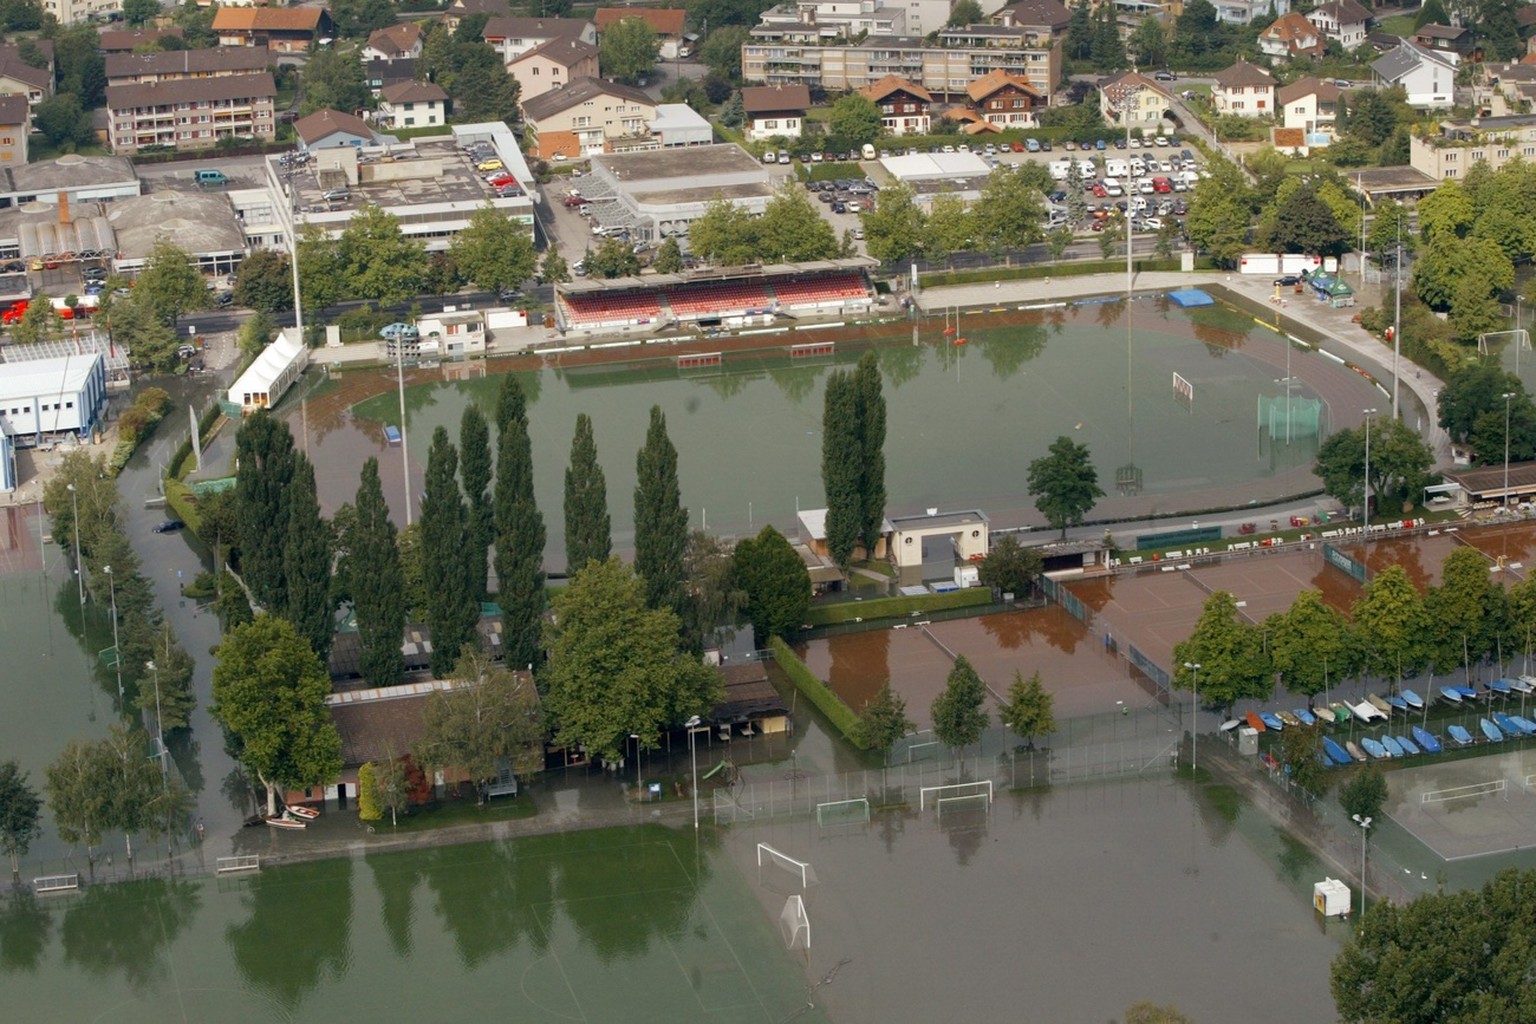 The Lachen soccer stadium of the FC Thun is completely flooded in Thun, Switzerland, Tuesday, August 23, 2005. After several days of continuous rainfall several rivers and lakes in central Switzerland ...